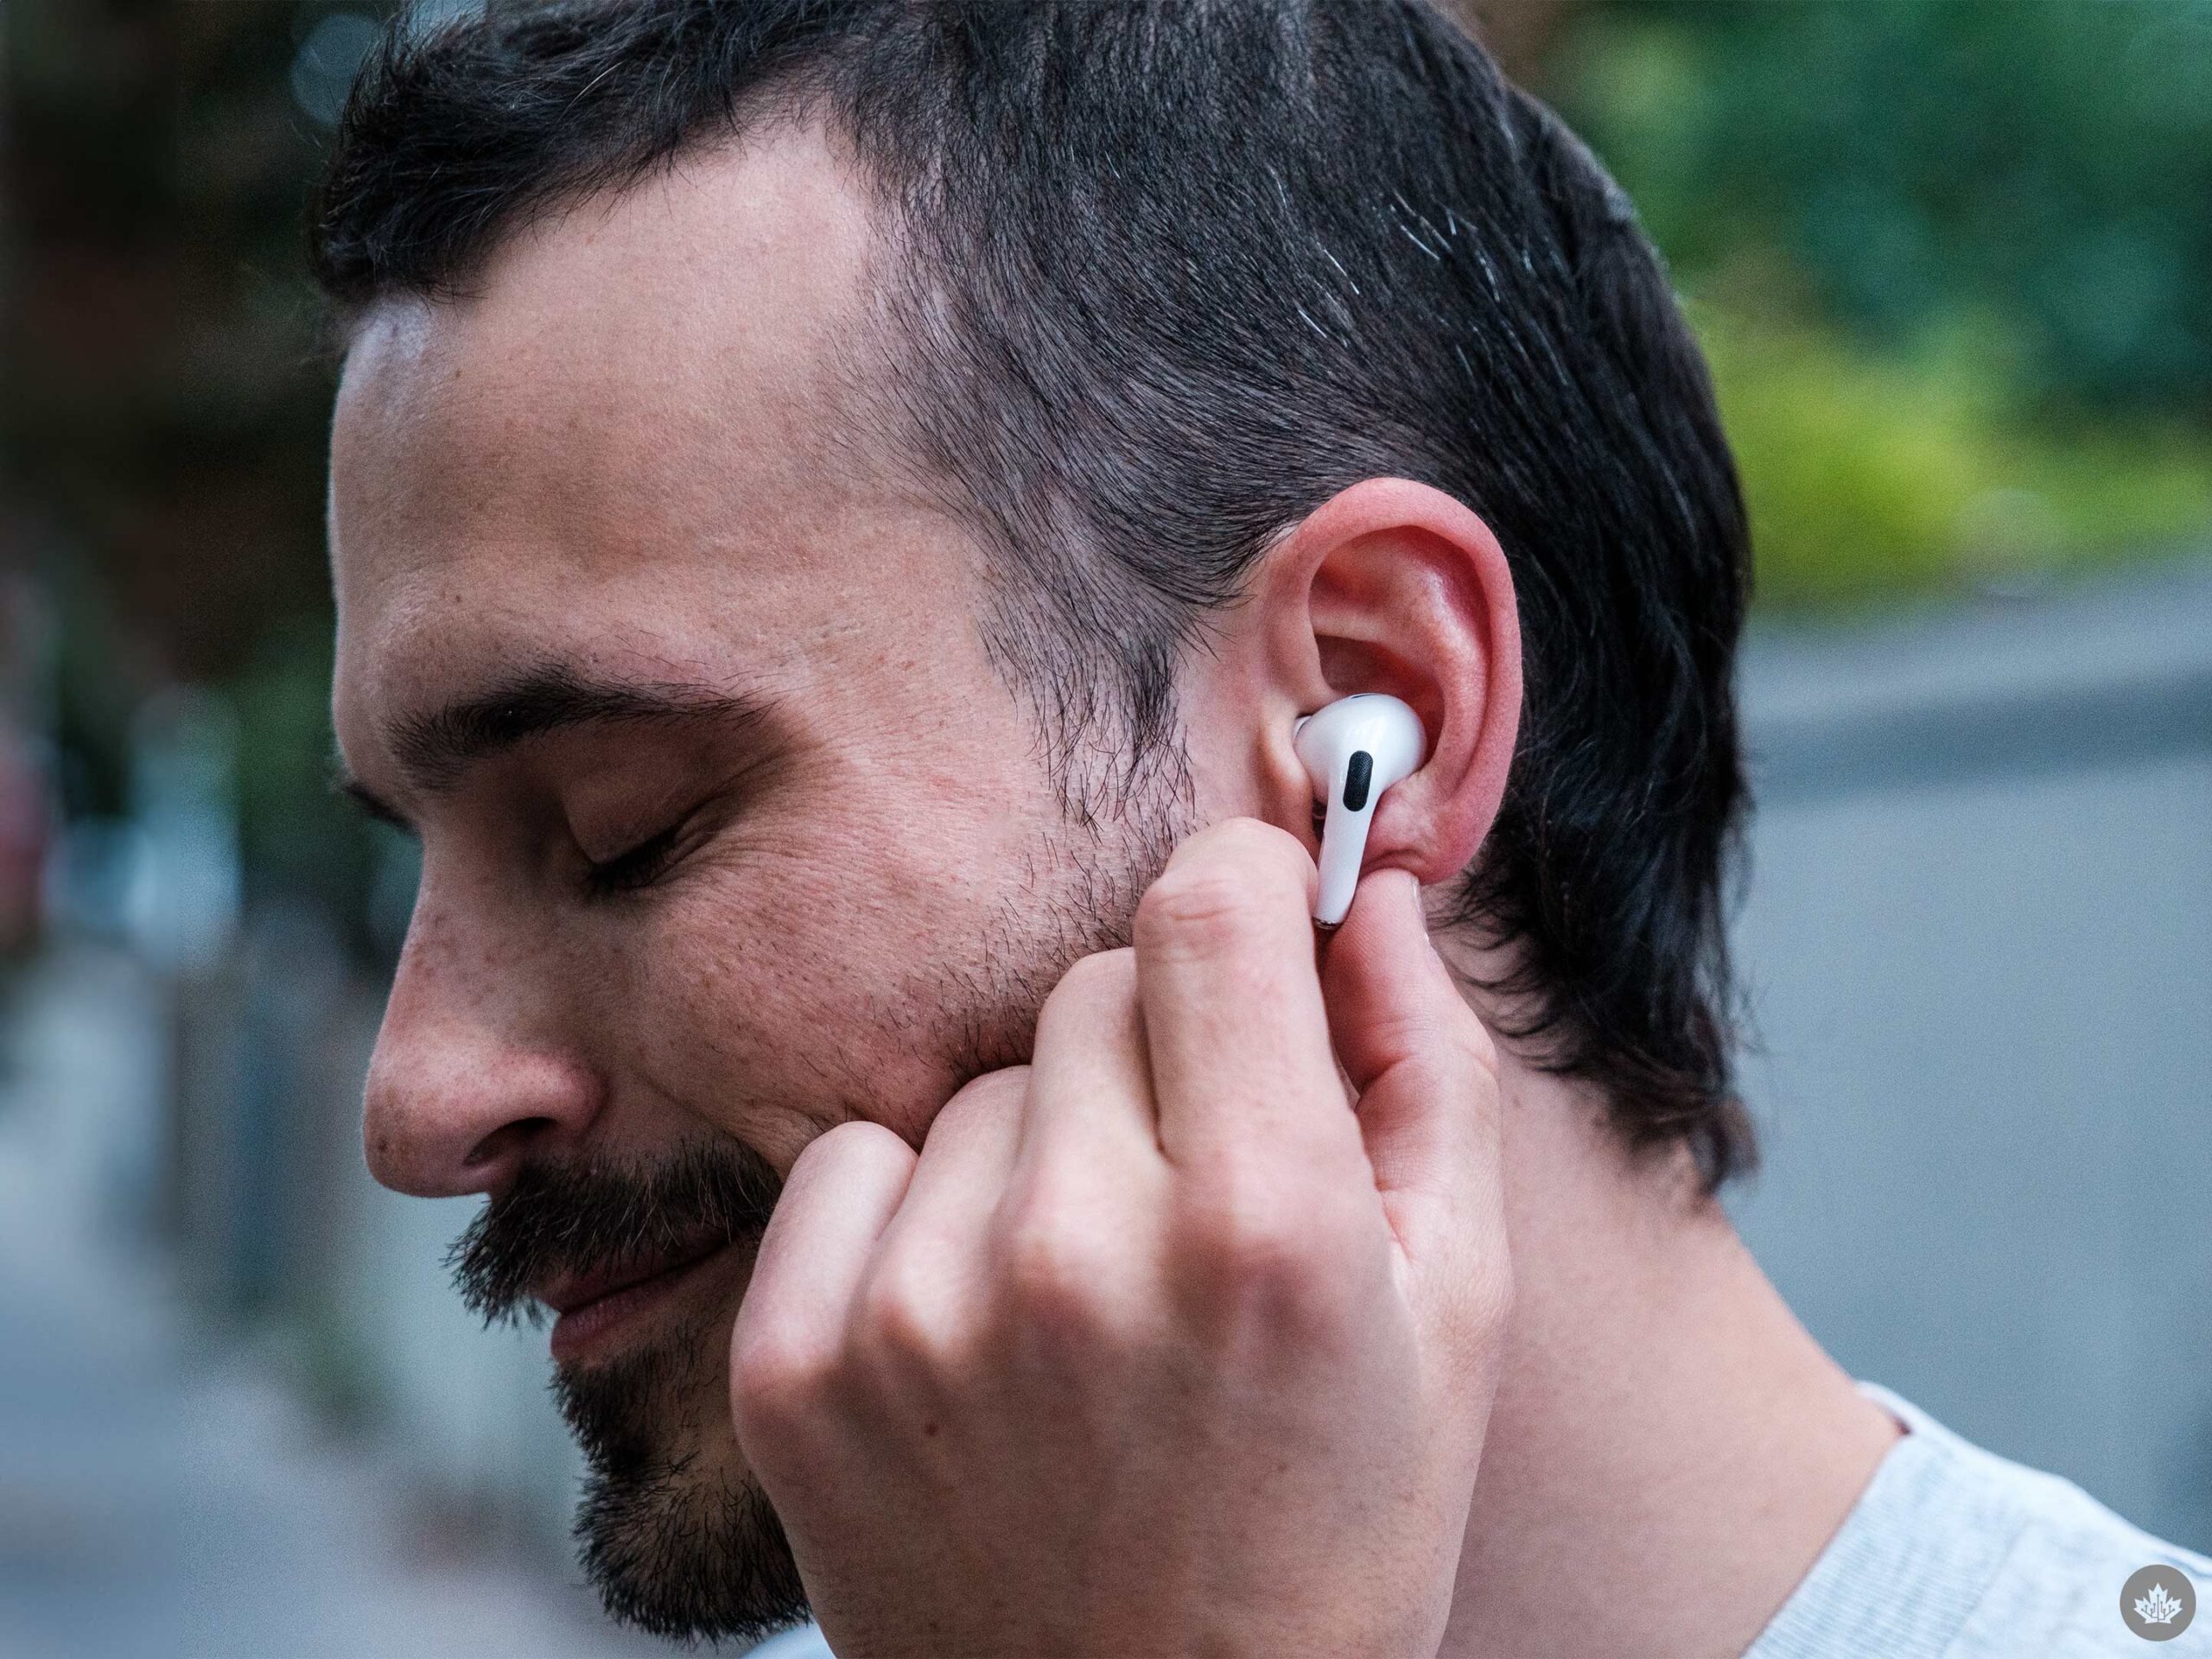 A photo of the author wearing the airpods and touching the stem.